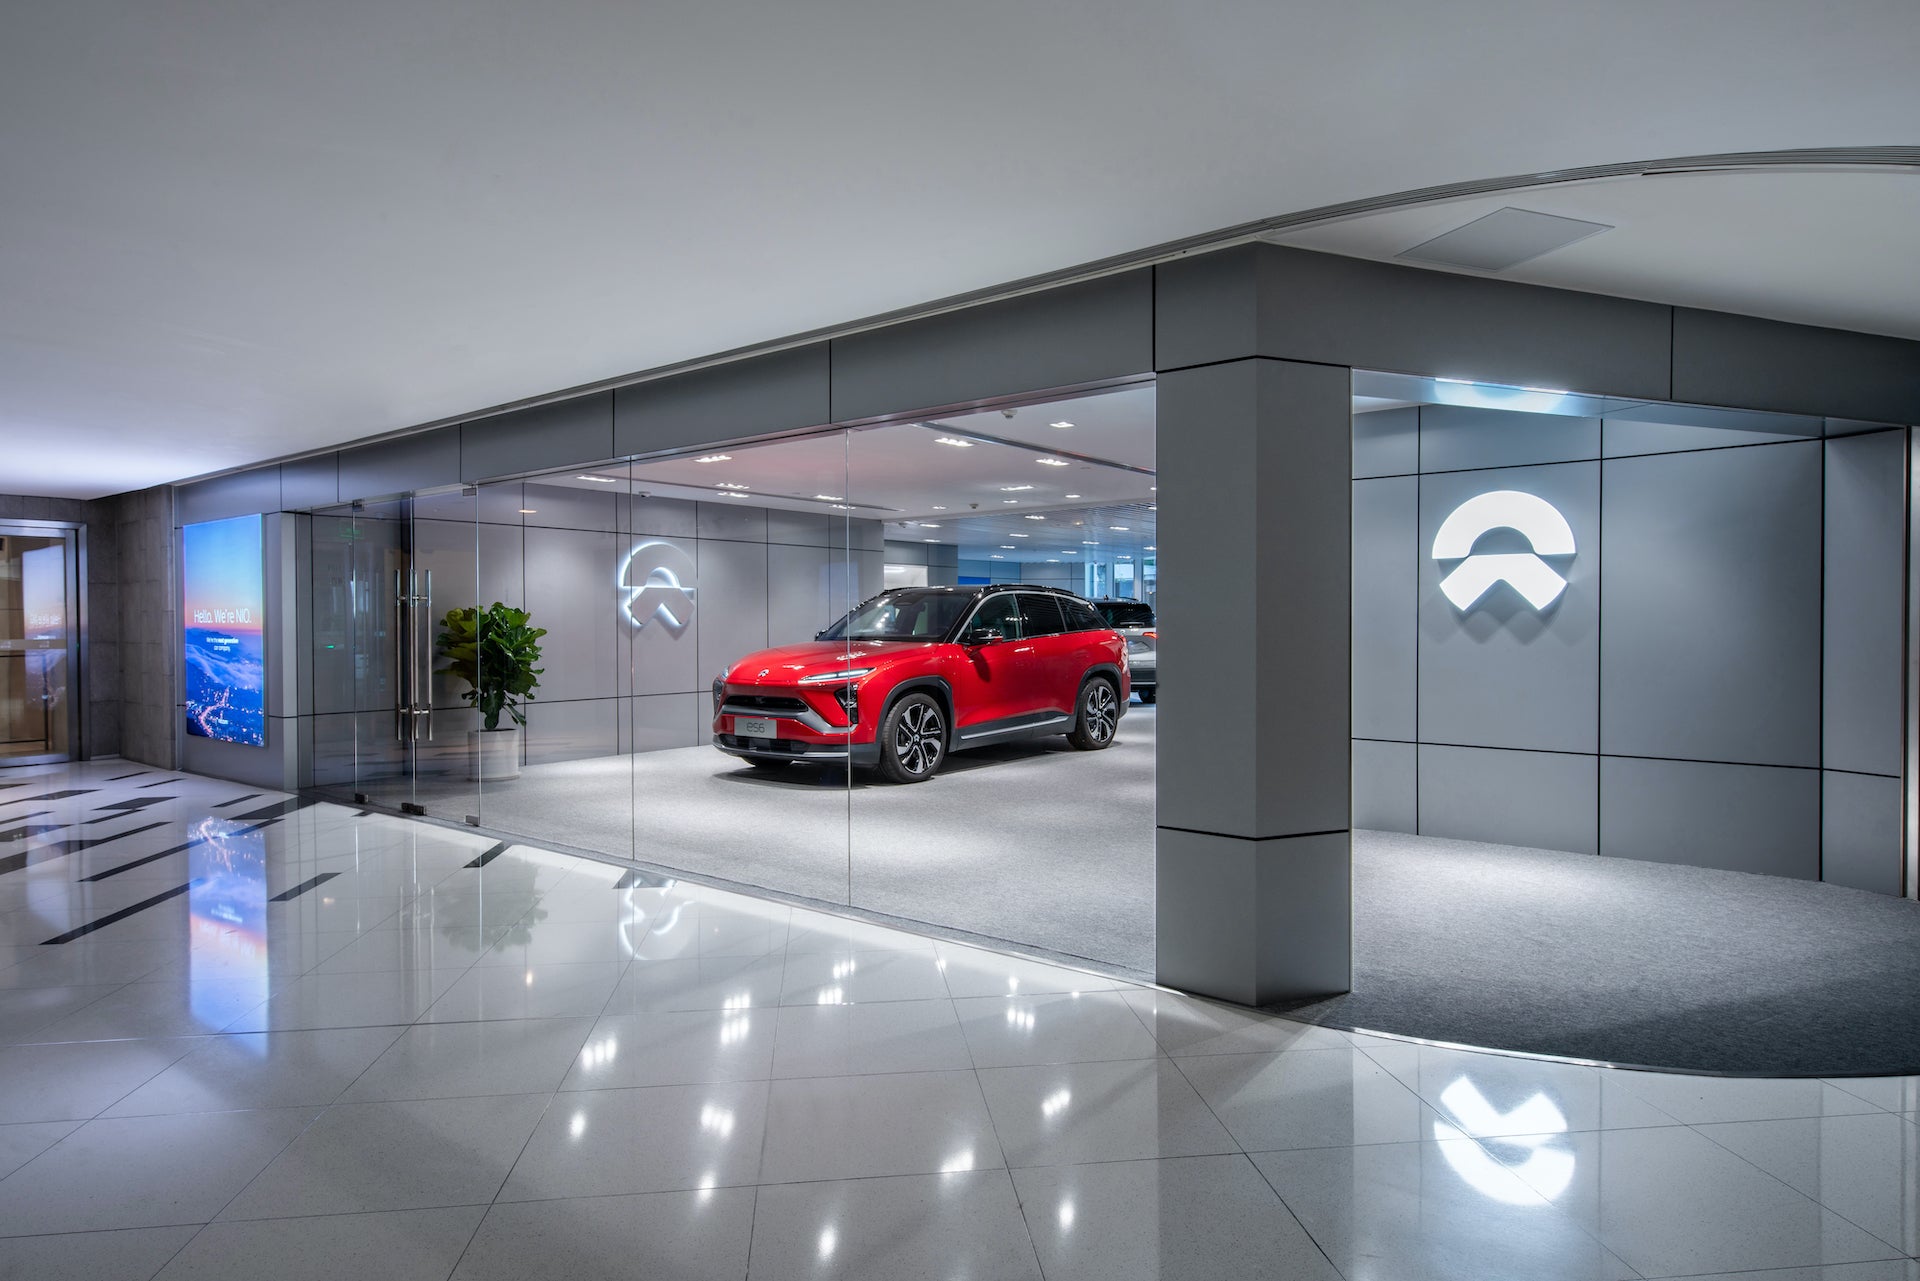 NIO Spaces: Continuing to Grow Our Community